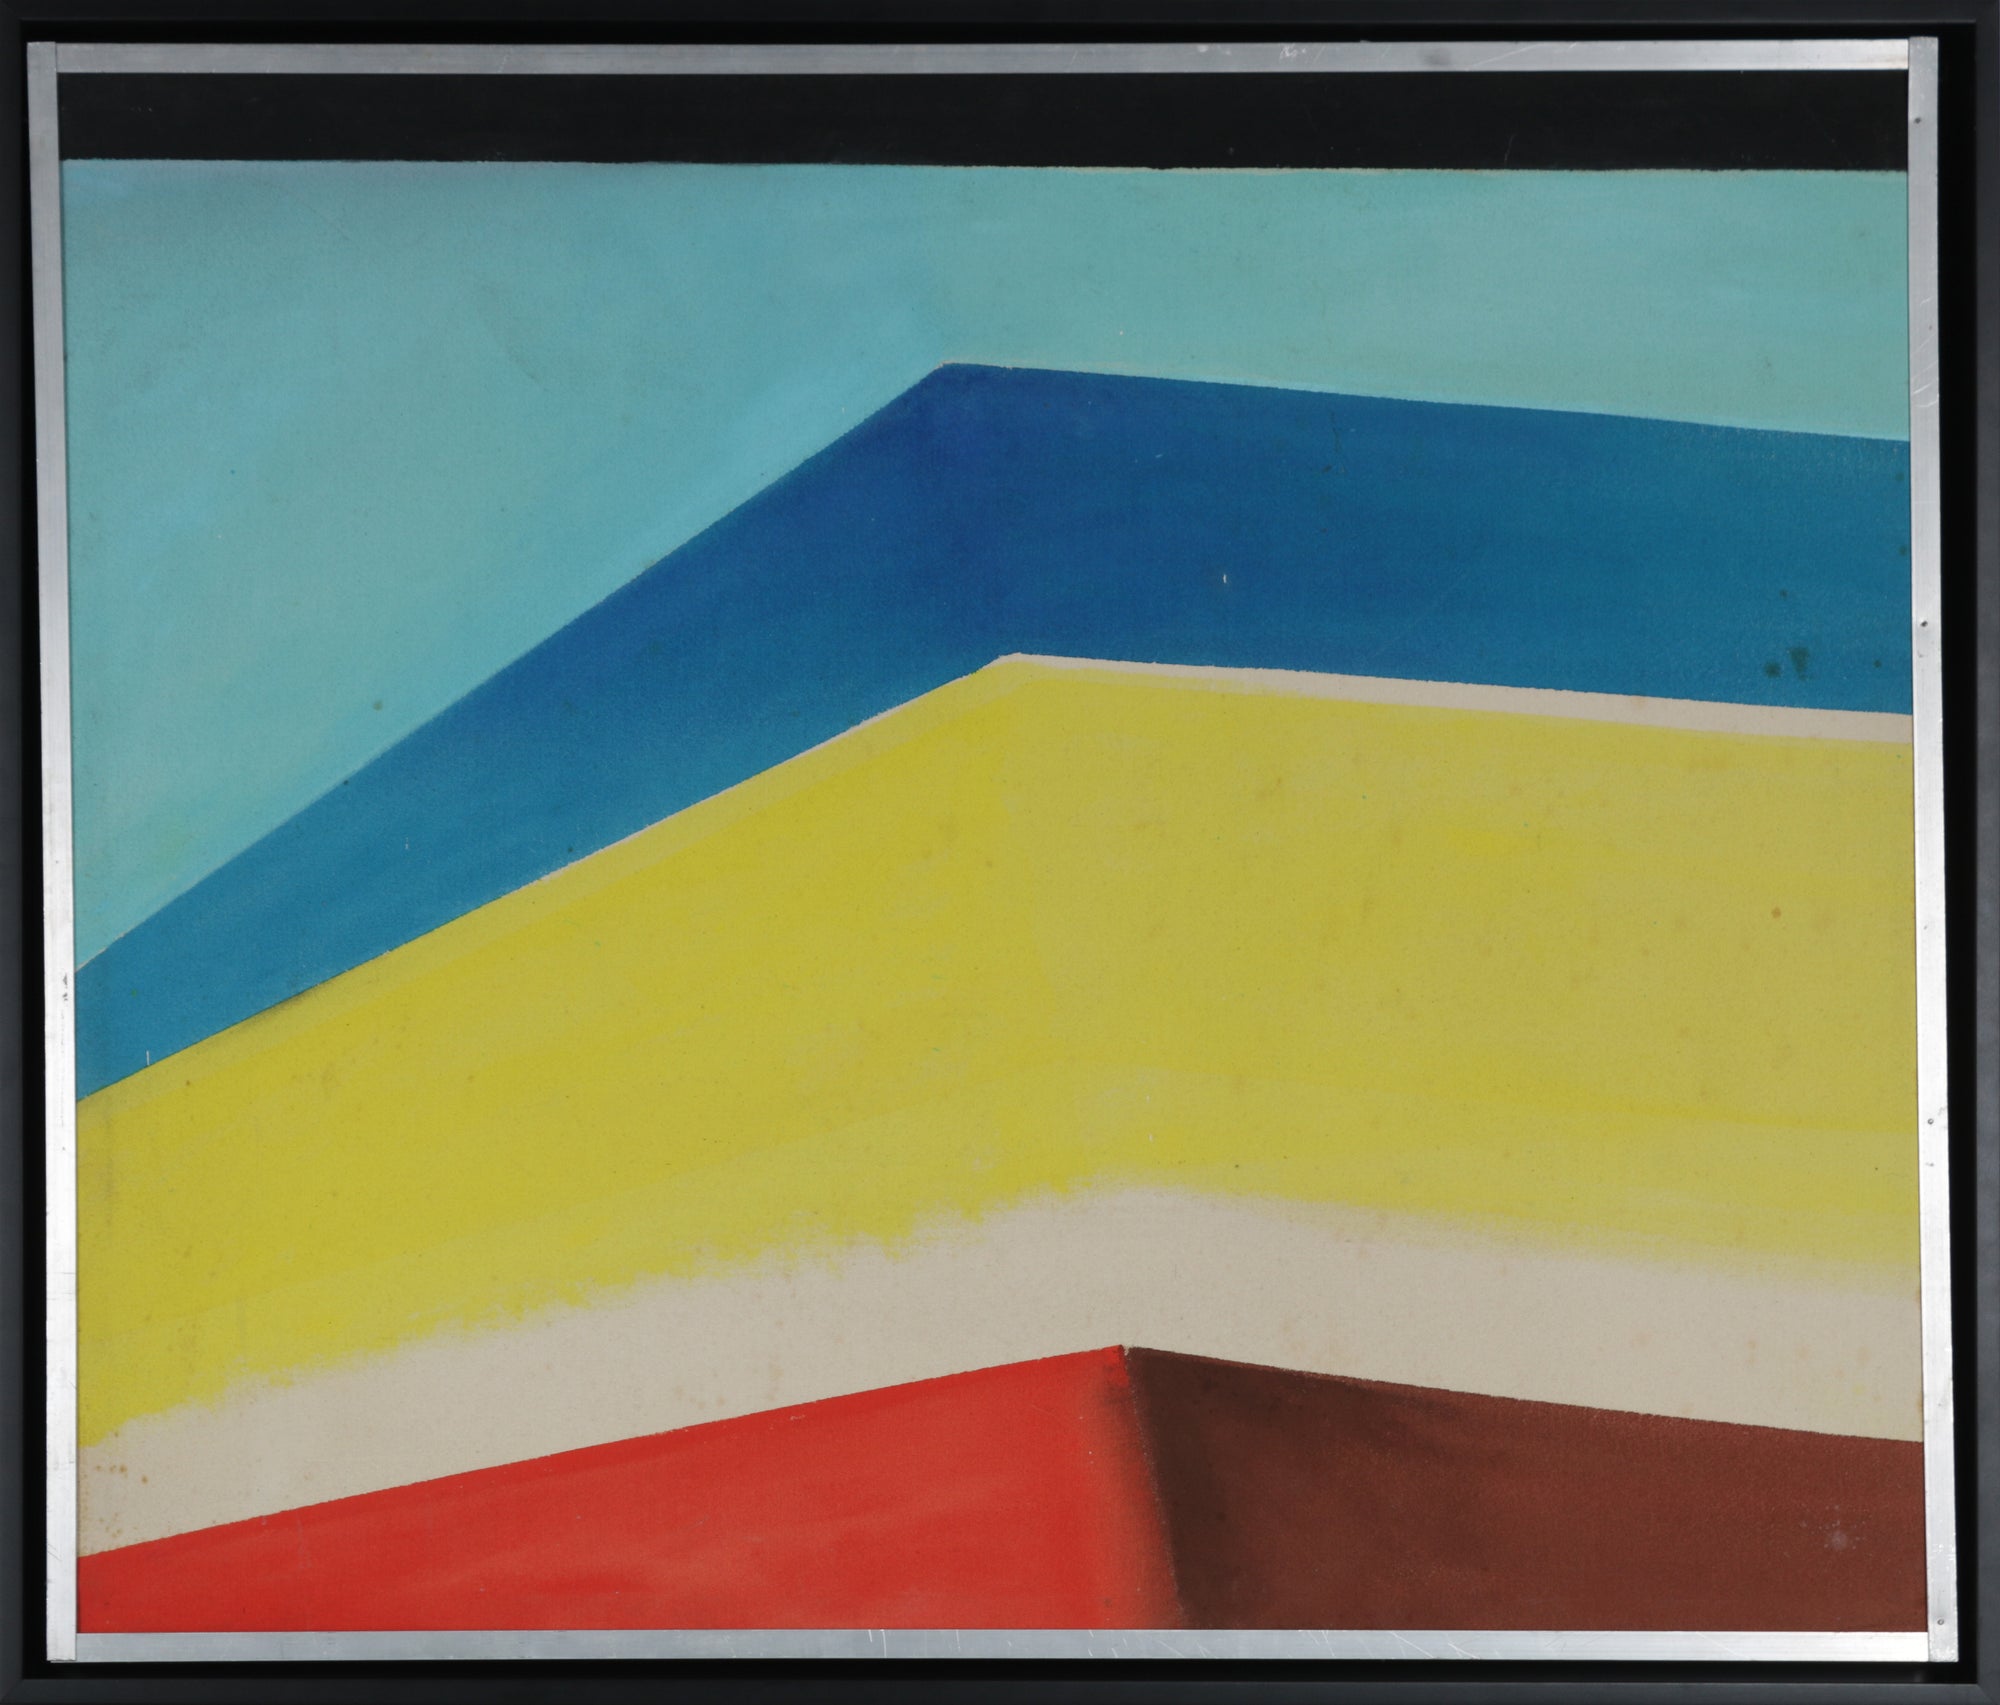 Blue, Yellow Red Chevron Bands <br>1974 Acrylic on Canvas <br><br>#B5611